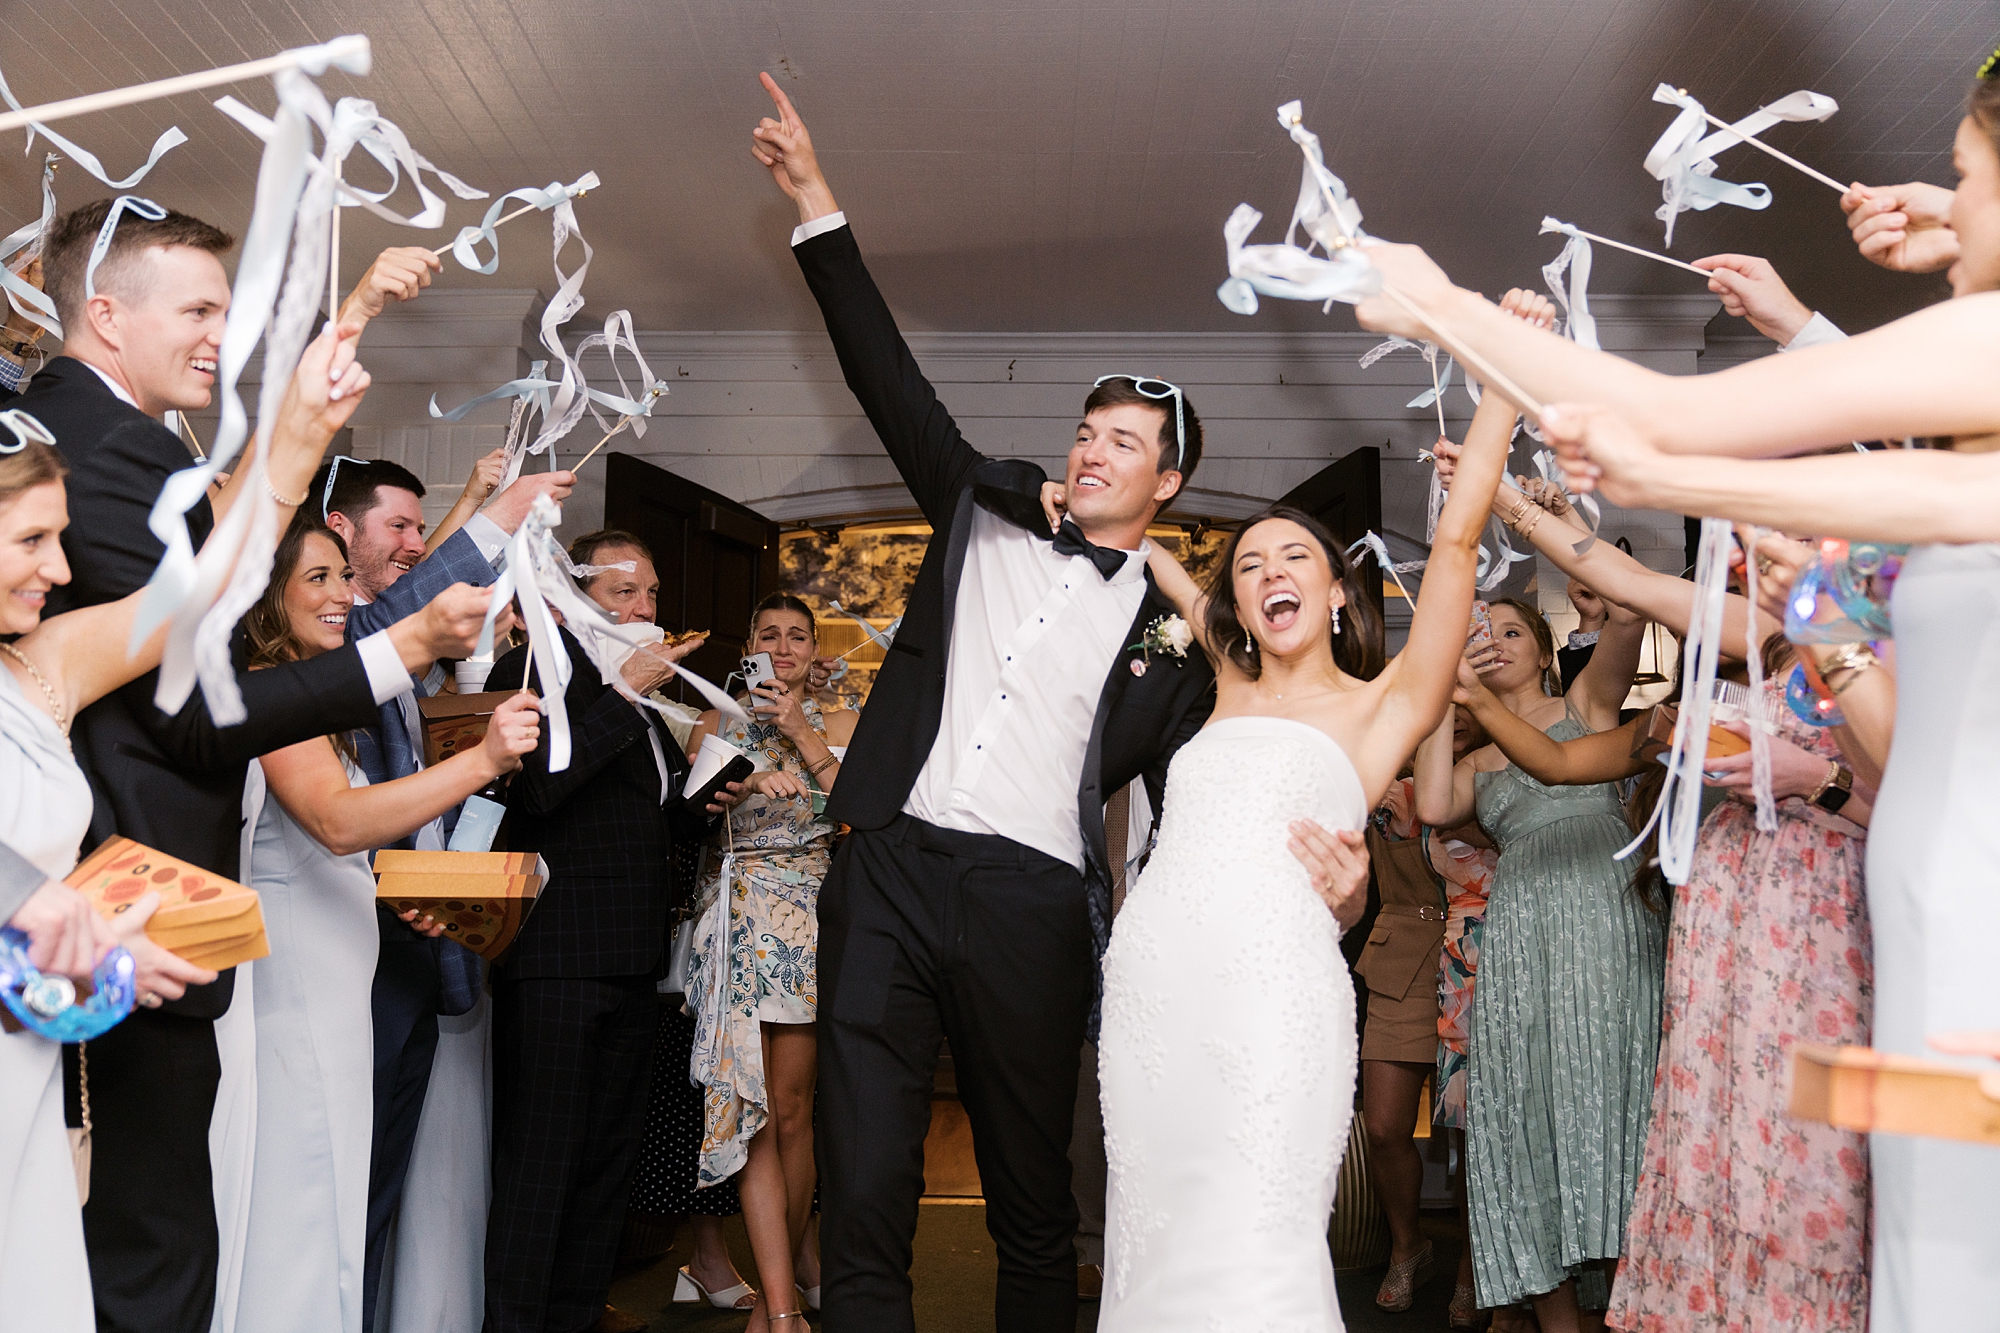 guests toss ribbons during reception dancing around newlyweds 